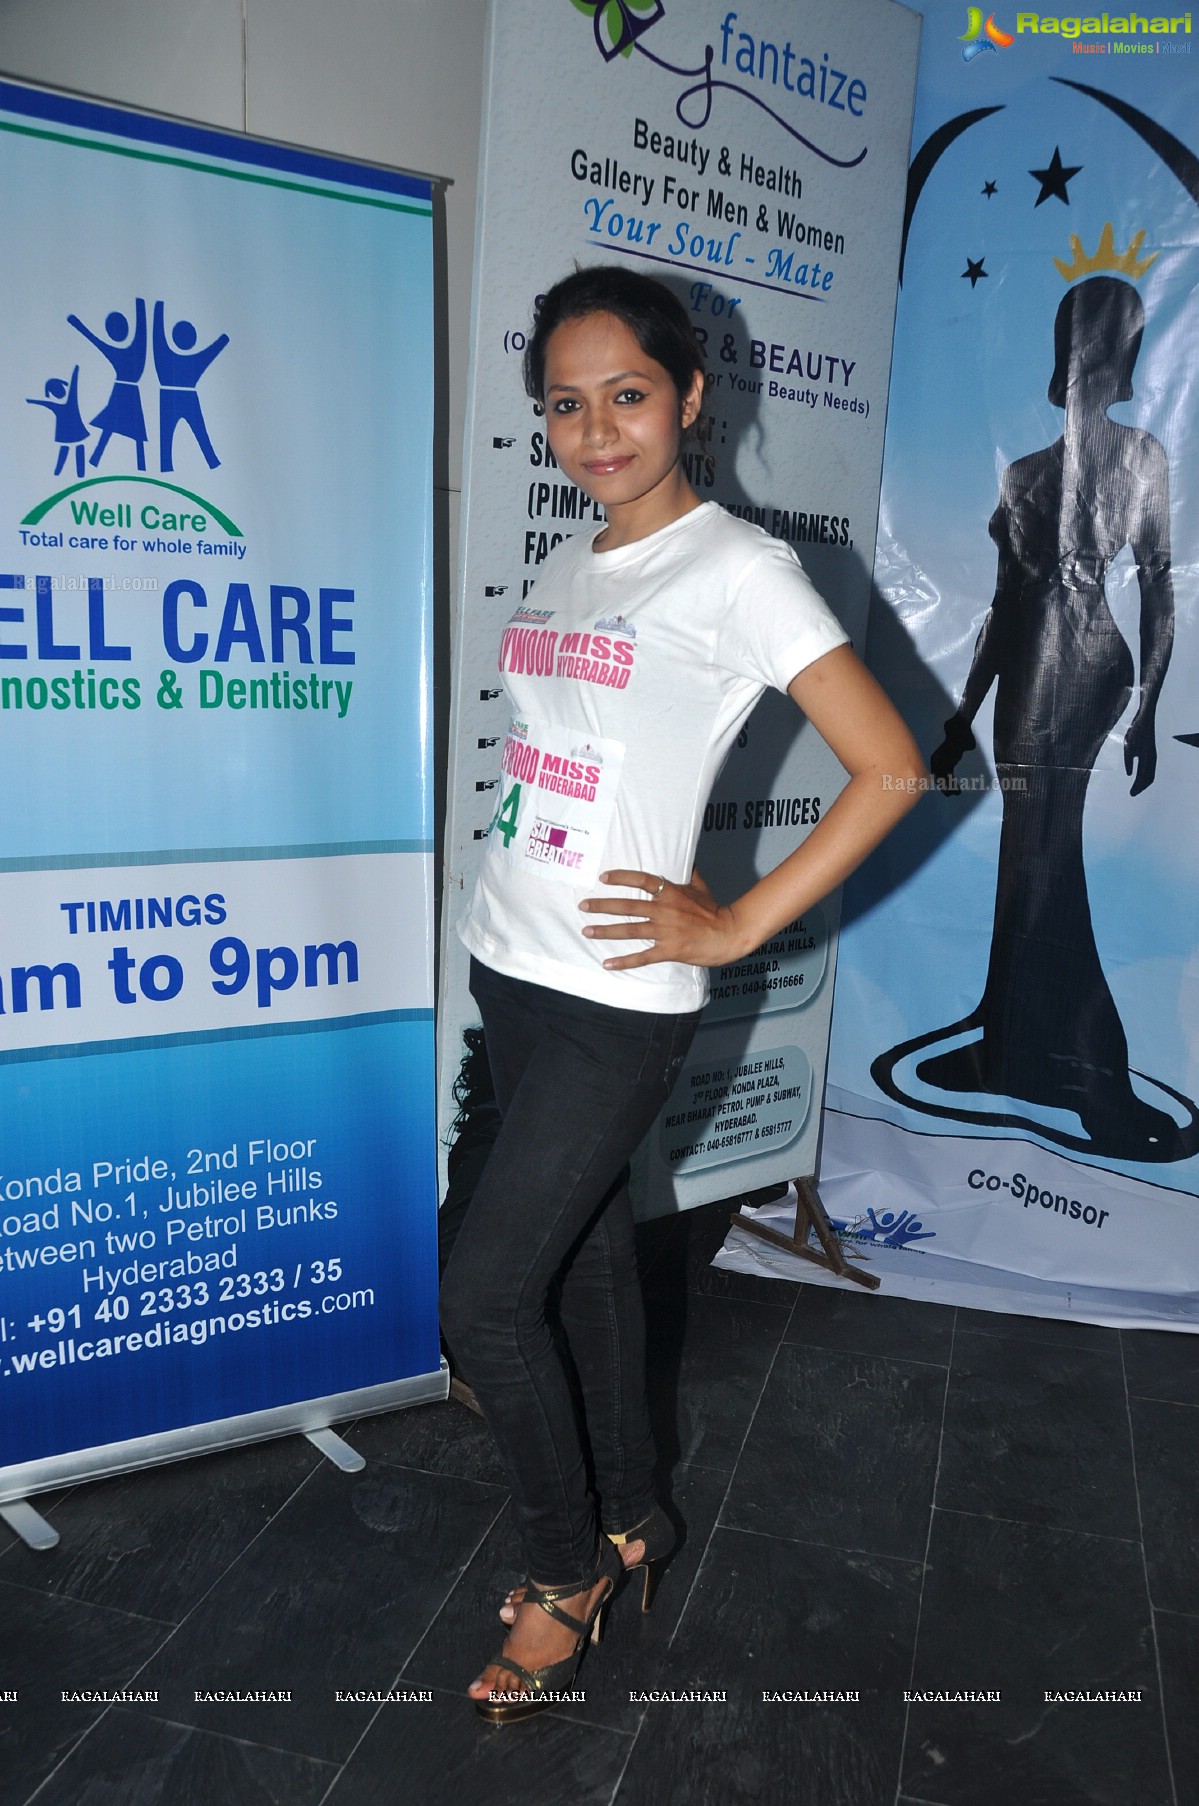 Dr.Shuba Skin & Laser Clinic and Fantaize Salon sponsors Tollywood Miss Hyderabad